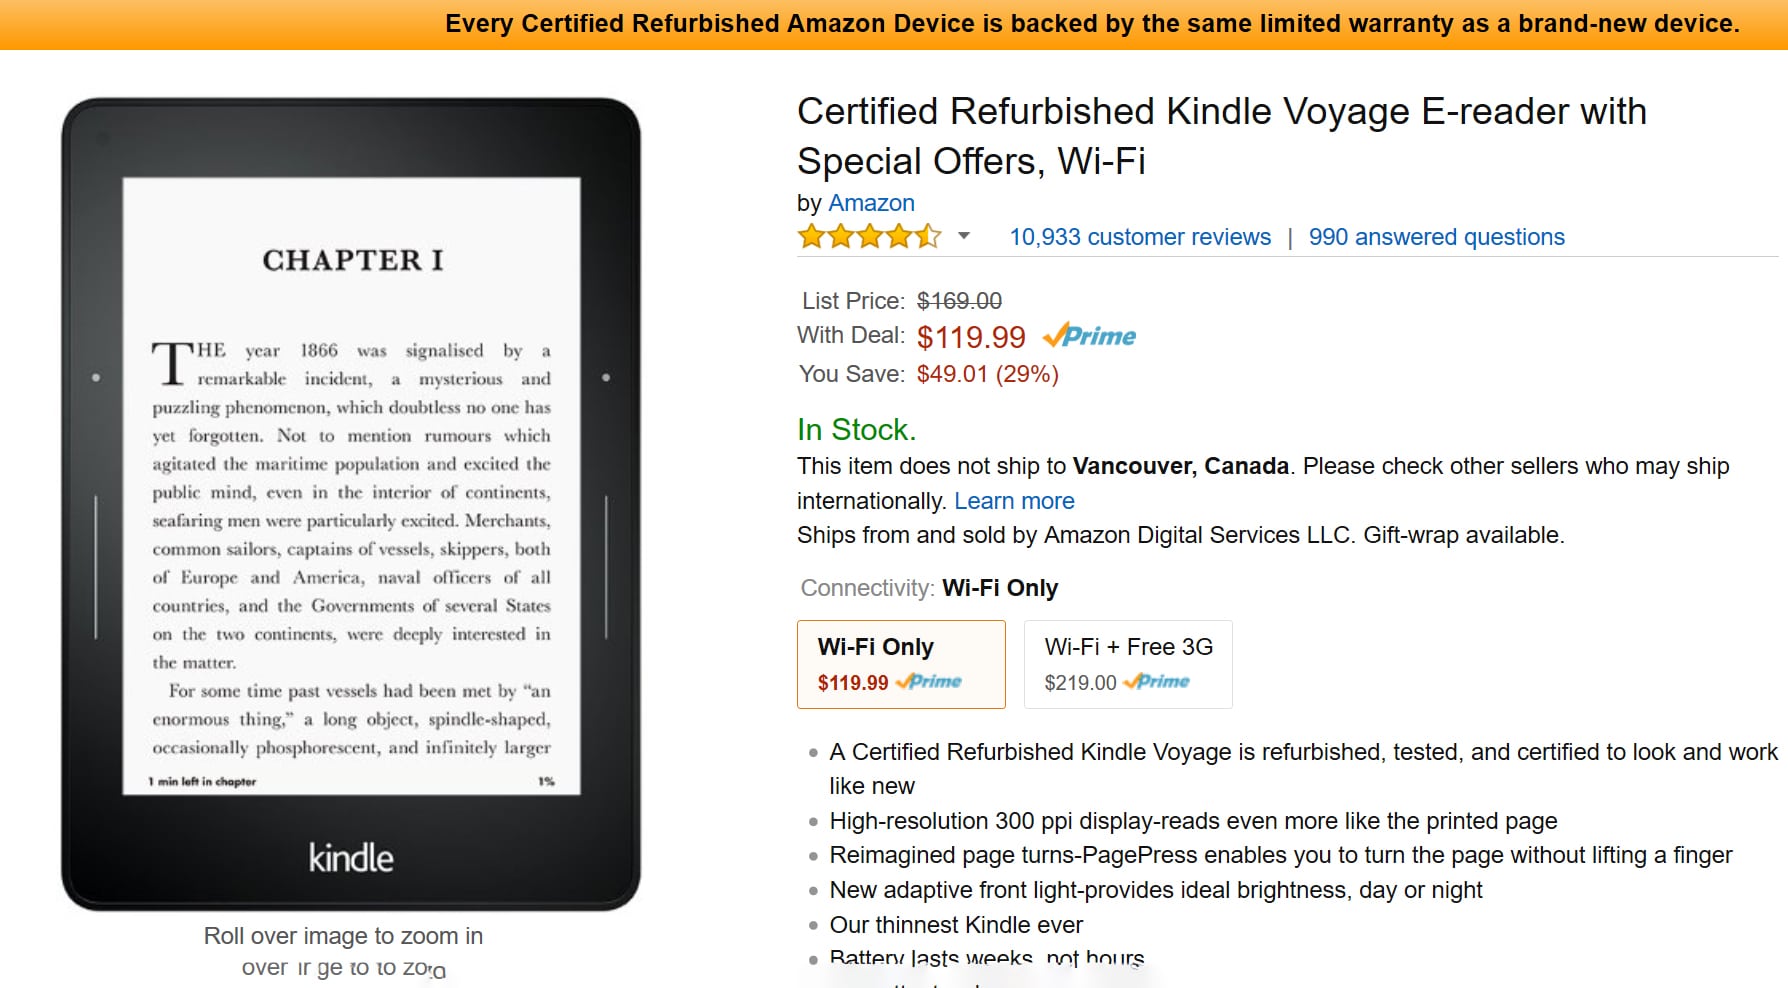 Wi-Fi Certified Refurbished Kindle Voyage E-reader with Special Offers 